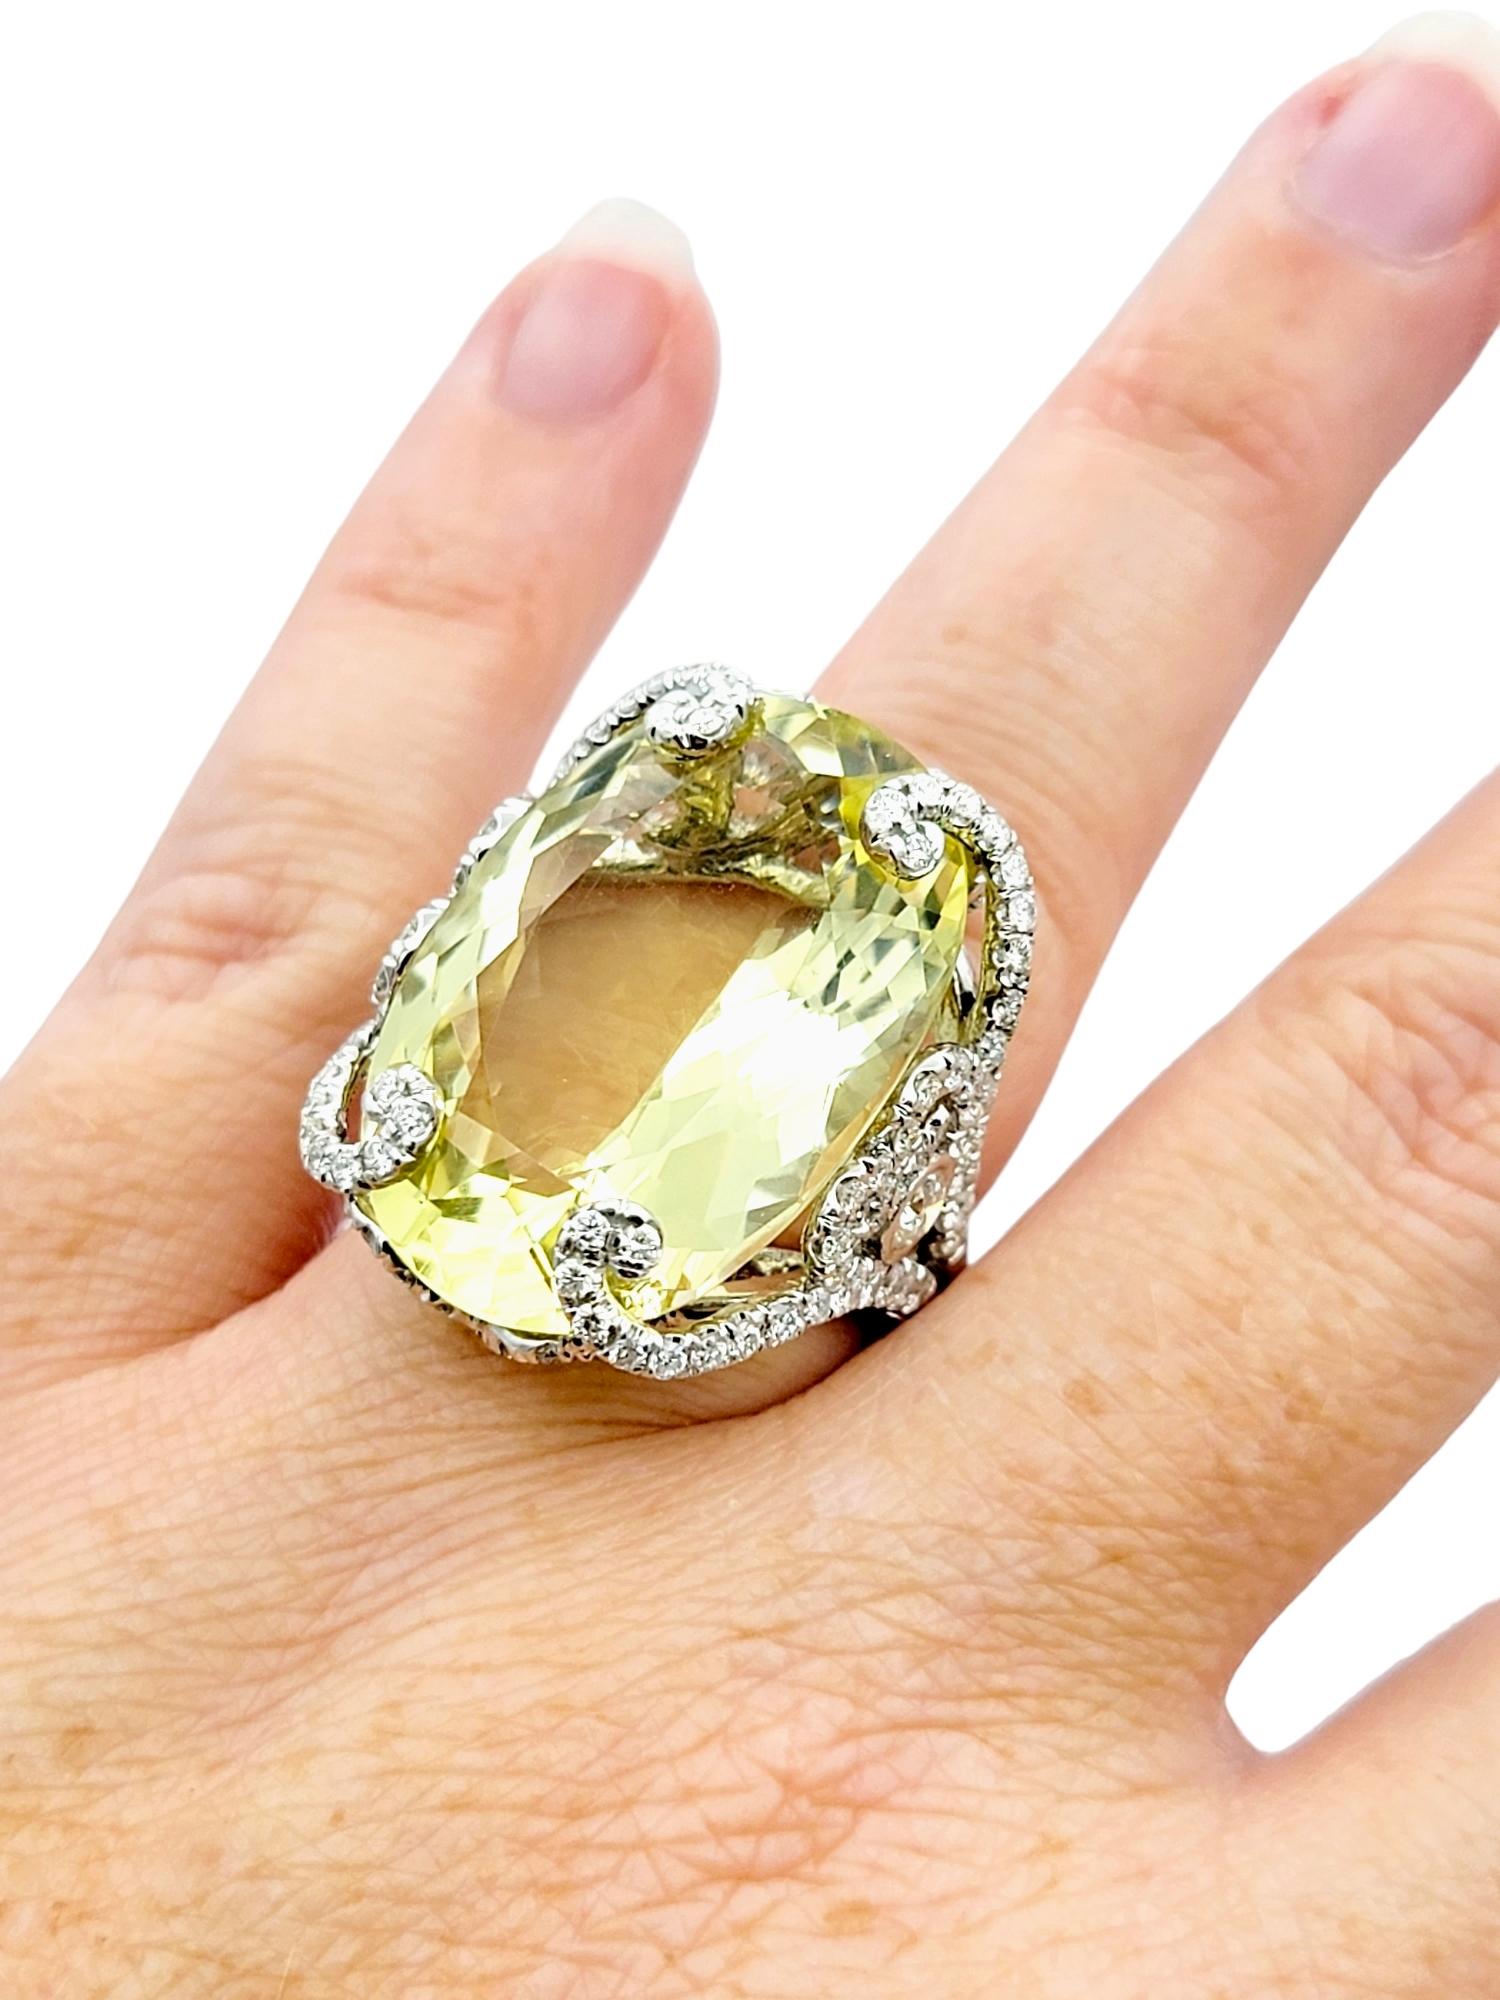 Huge 31.0 Carat Oval Cut Prasiolite Cocktail Ring with Diamond Accents 14K Gold For Sale 3